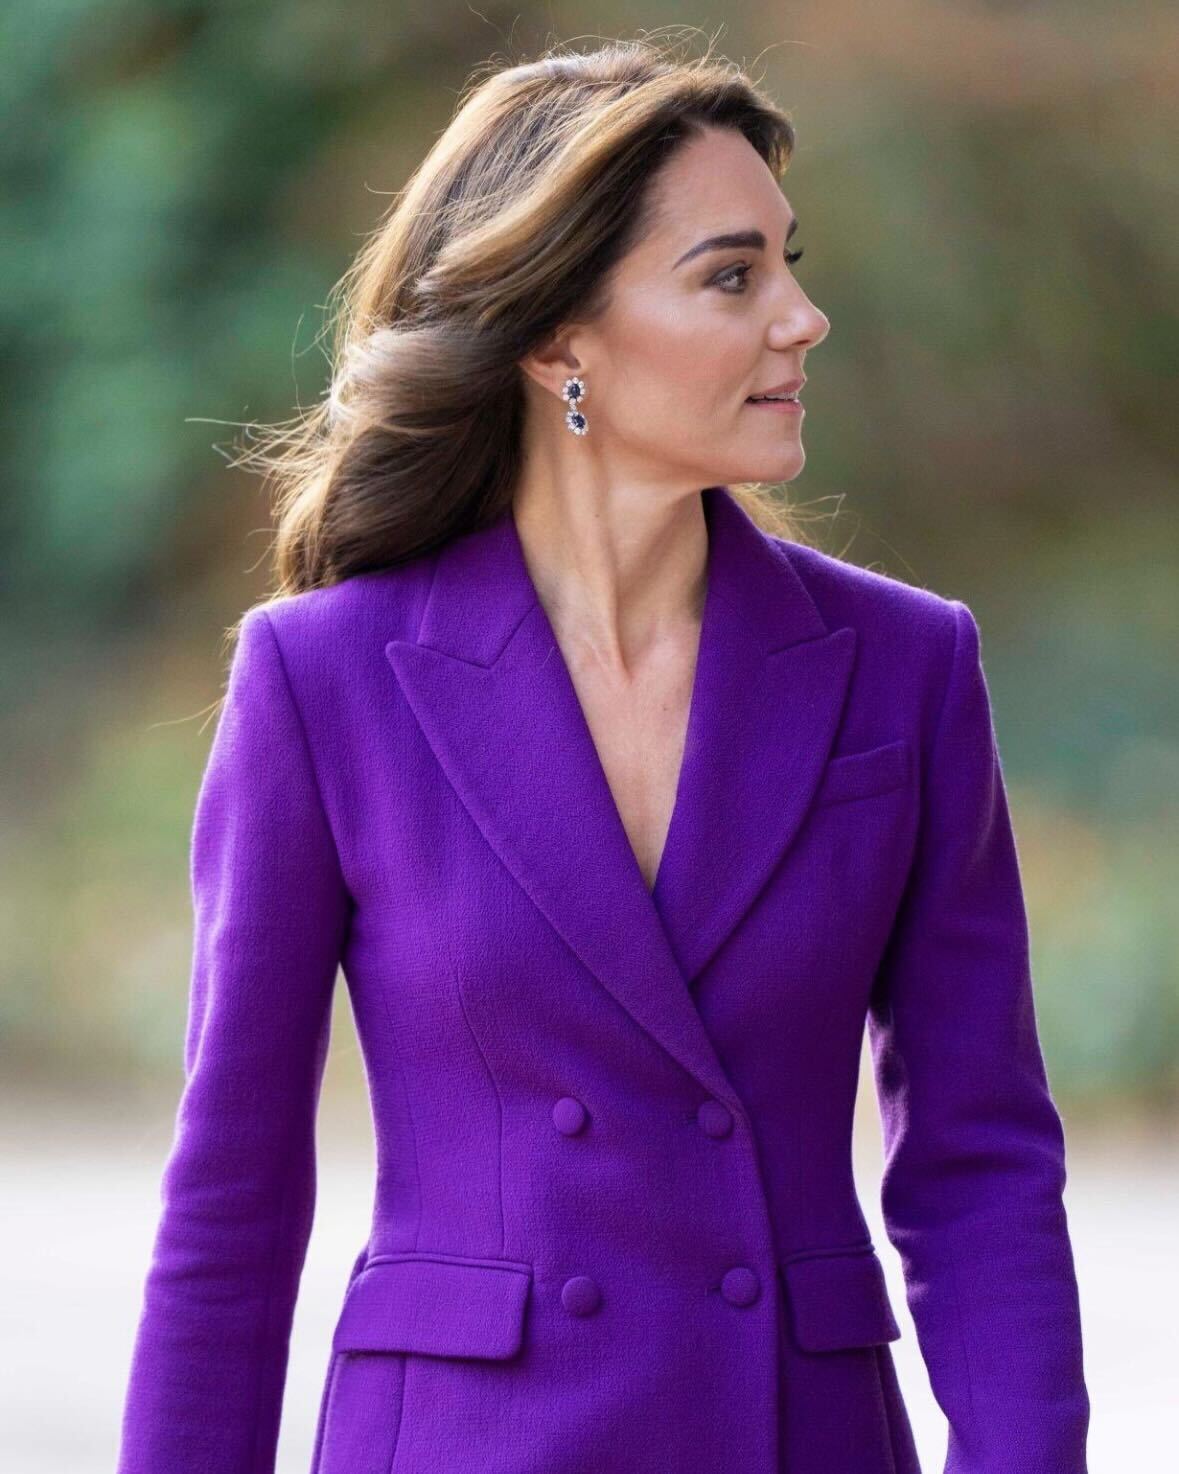 Kate Middleton’s latest earrings were once on the cover of Vogue – VISIT